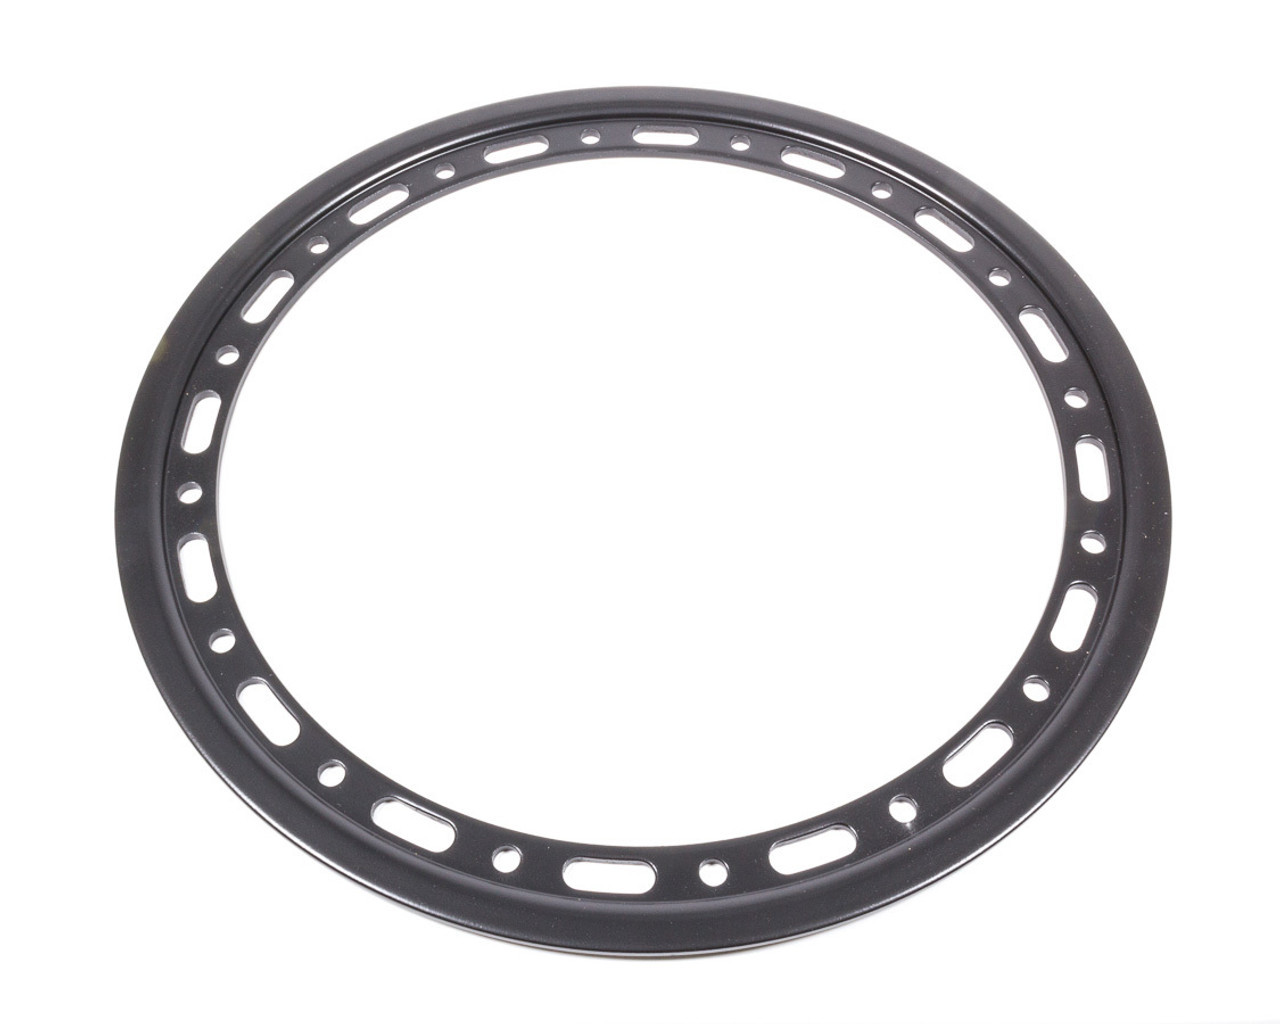 Weld Oval Mod Beadlock Ring 15in. (16-Hole/Bolt-On) - Black w/6-Dzus (No Cover) - P650-5314M-6